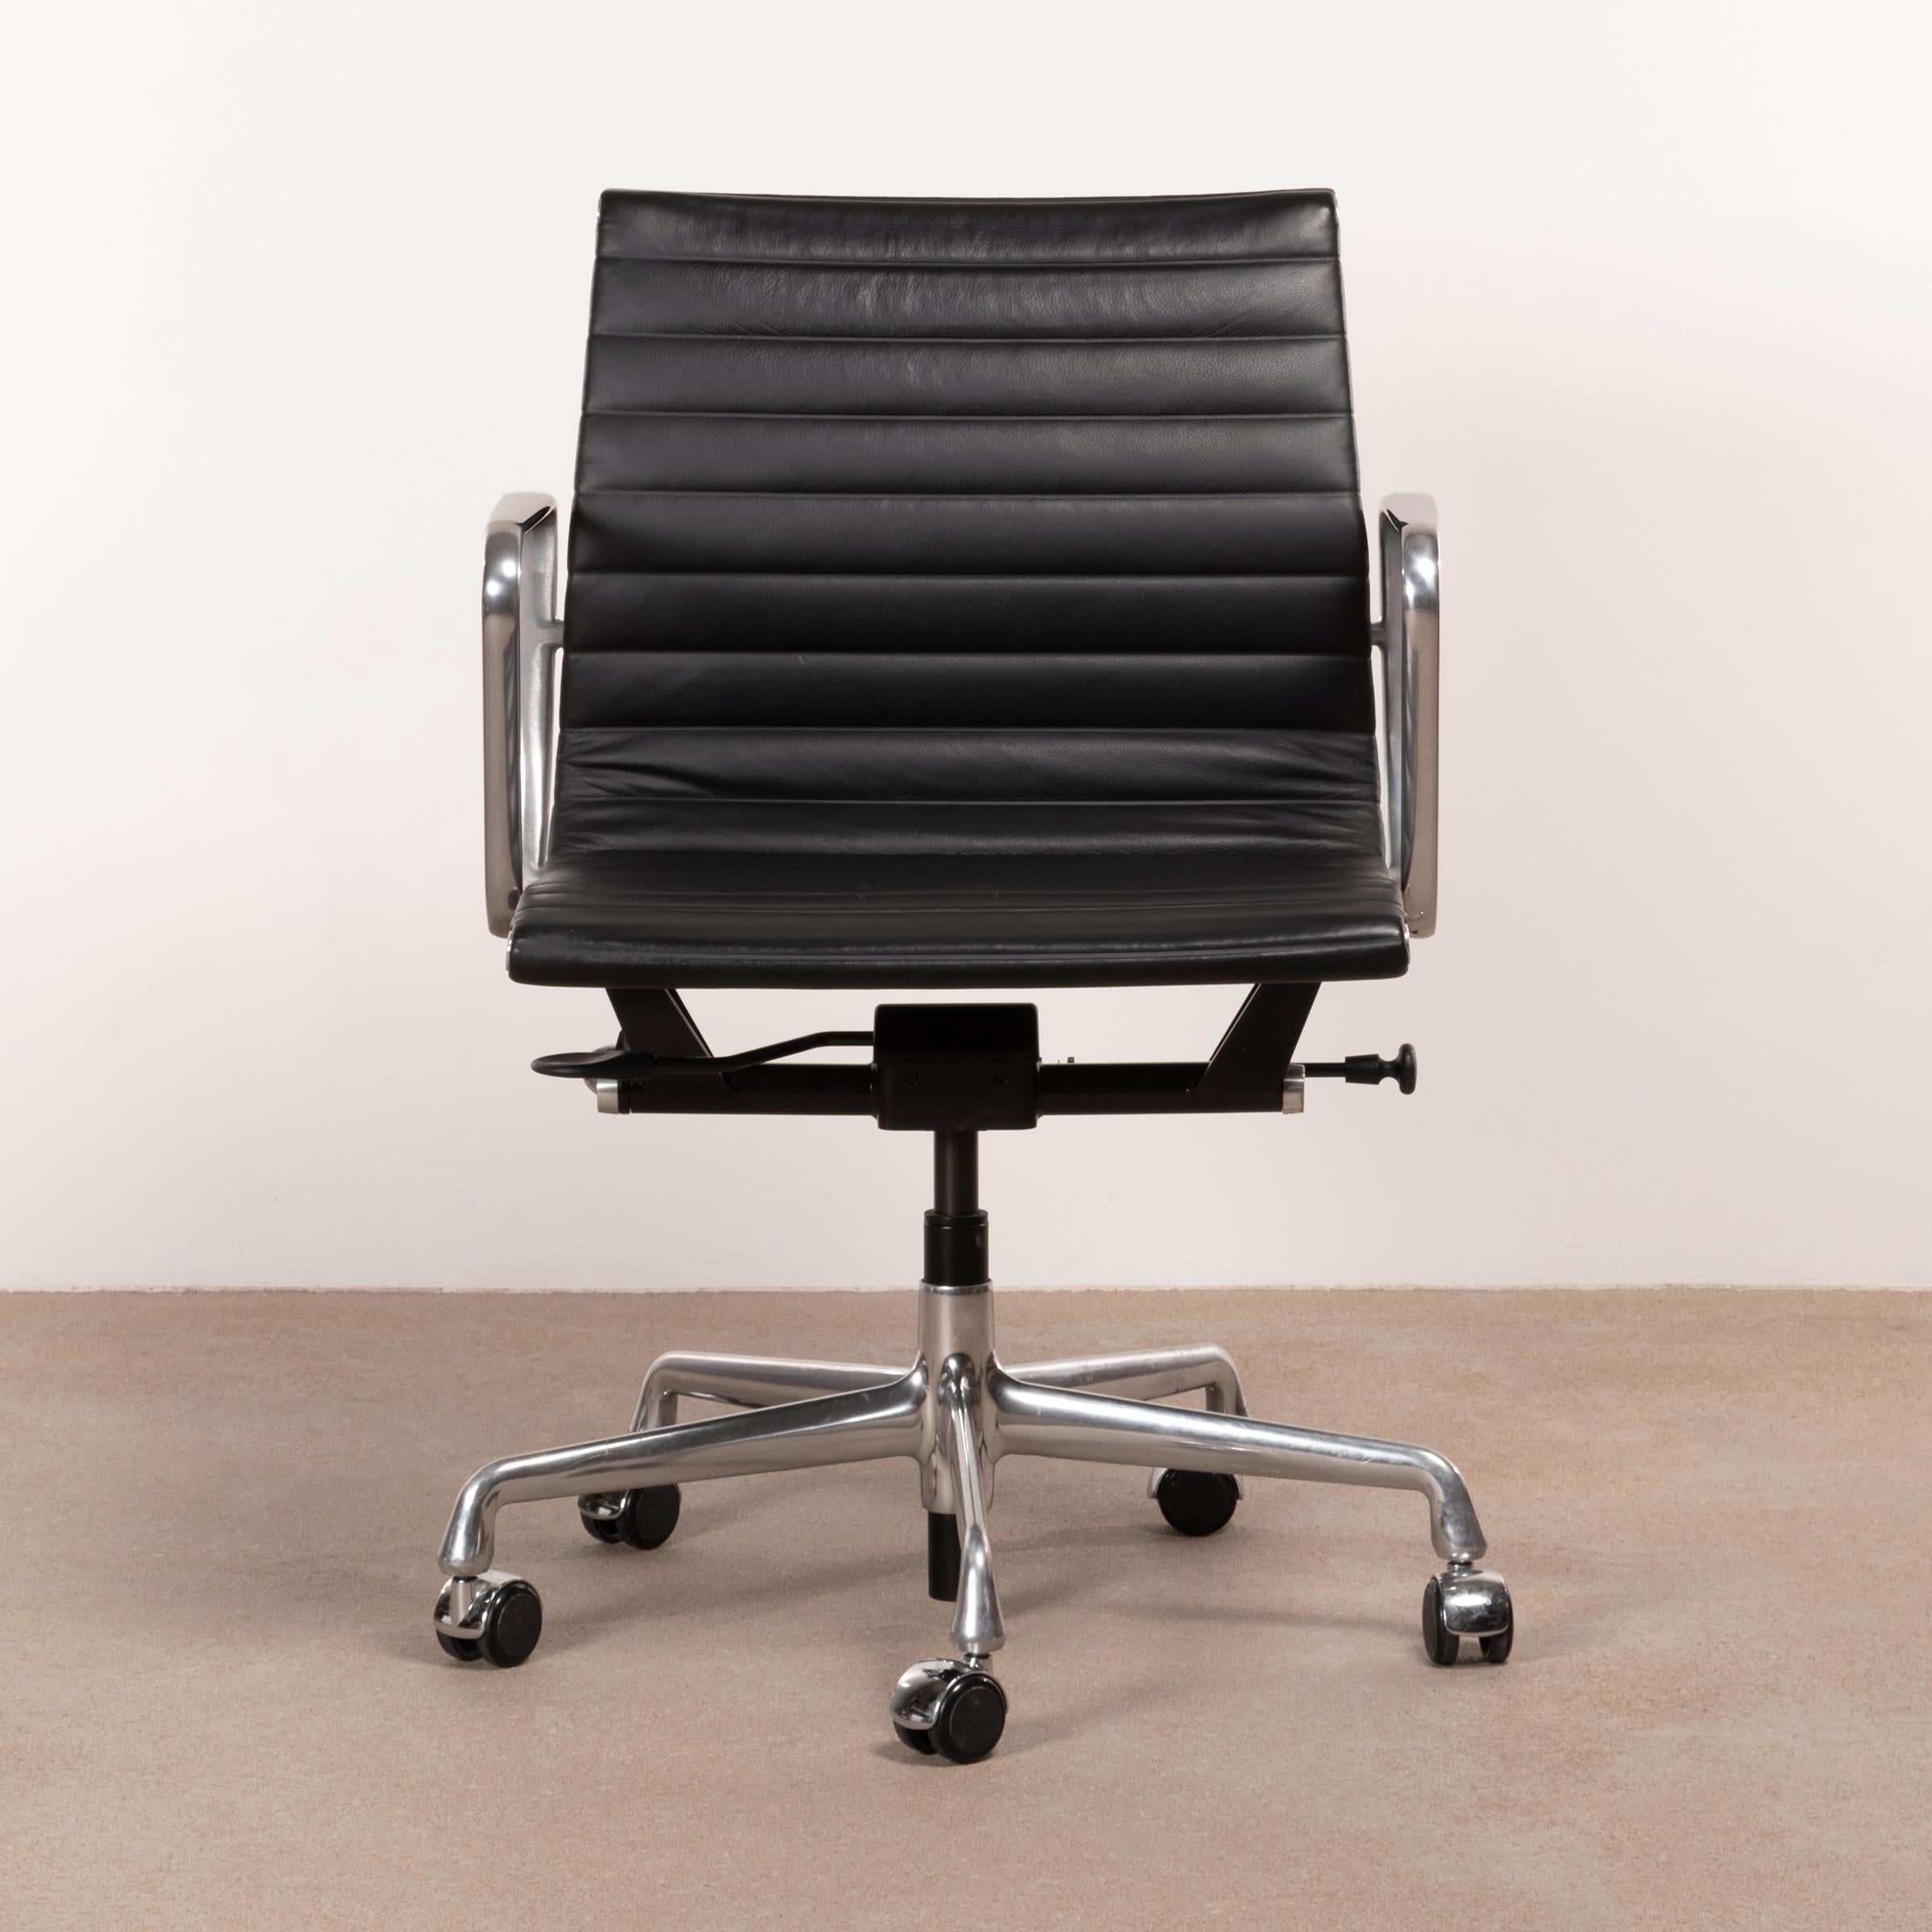 Eames EA335 management office chair in black leather with five-star base, height adjustment (gasspring) and tilt-swivel mechanism. Very good original condition signed with manufacturer's label. Multiple chairs available.